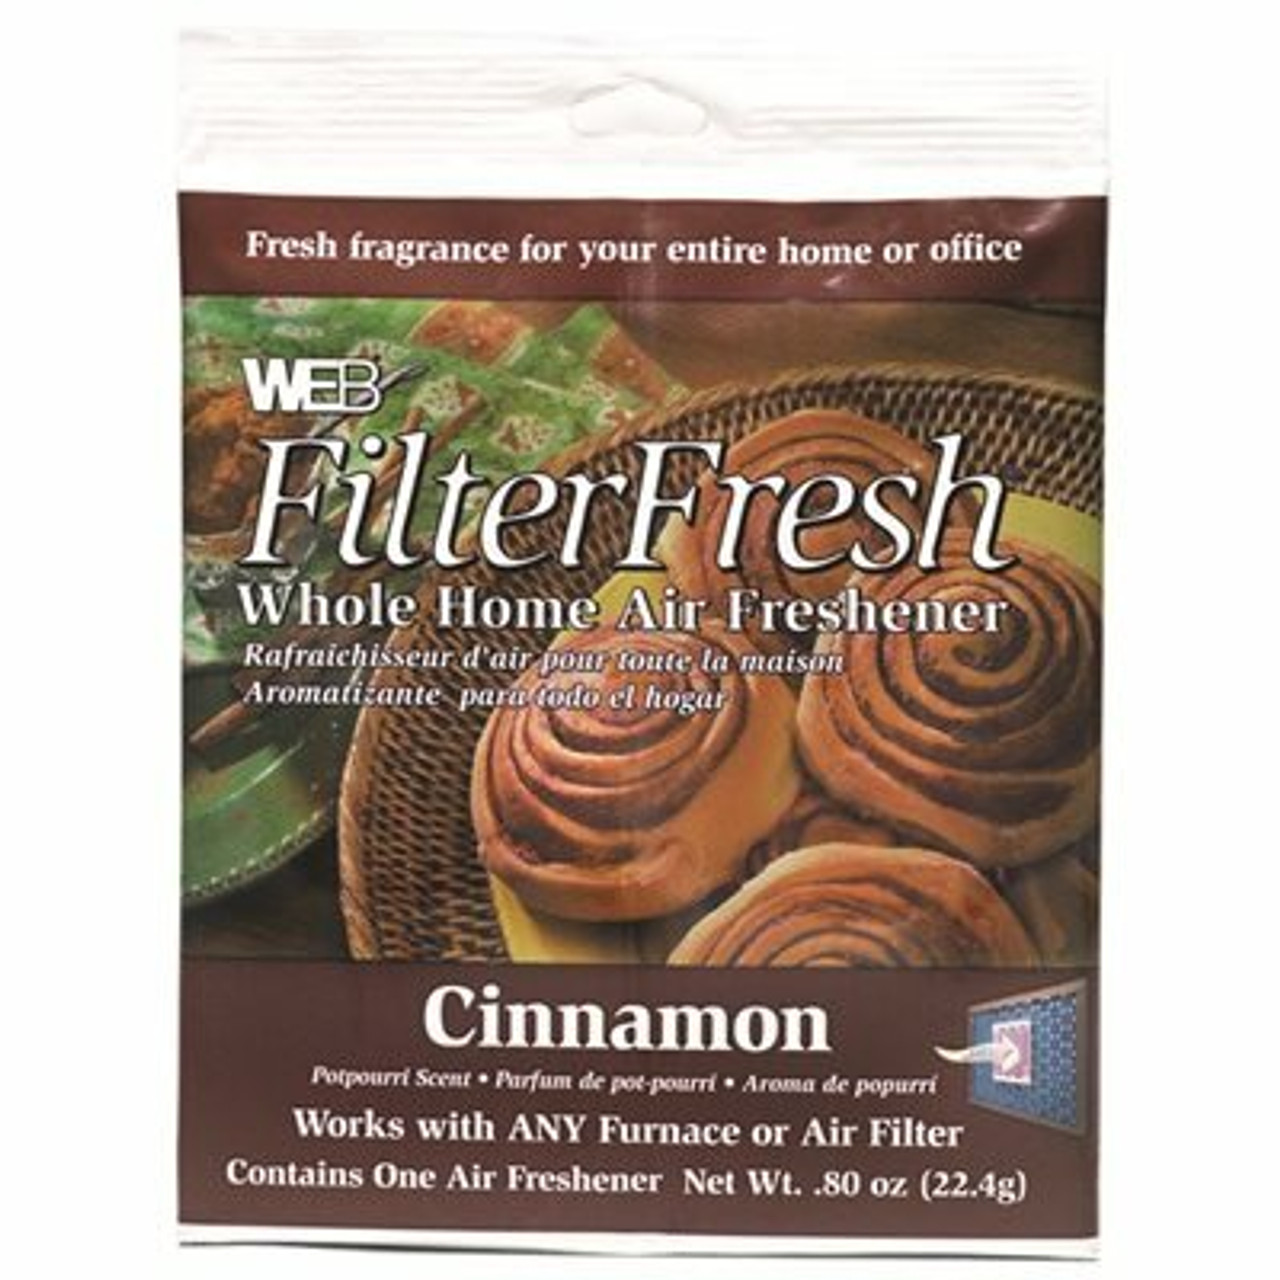 Web Products Filter Fresh Cinnamon Whole Home Air Freshener